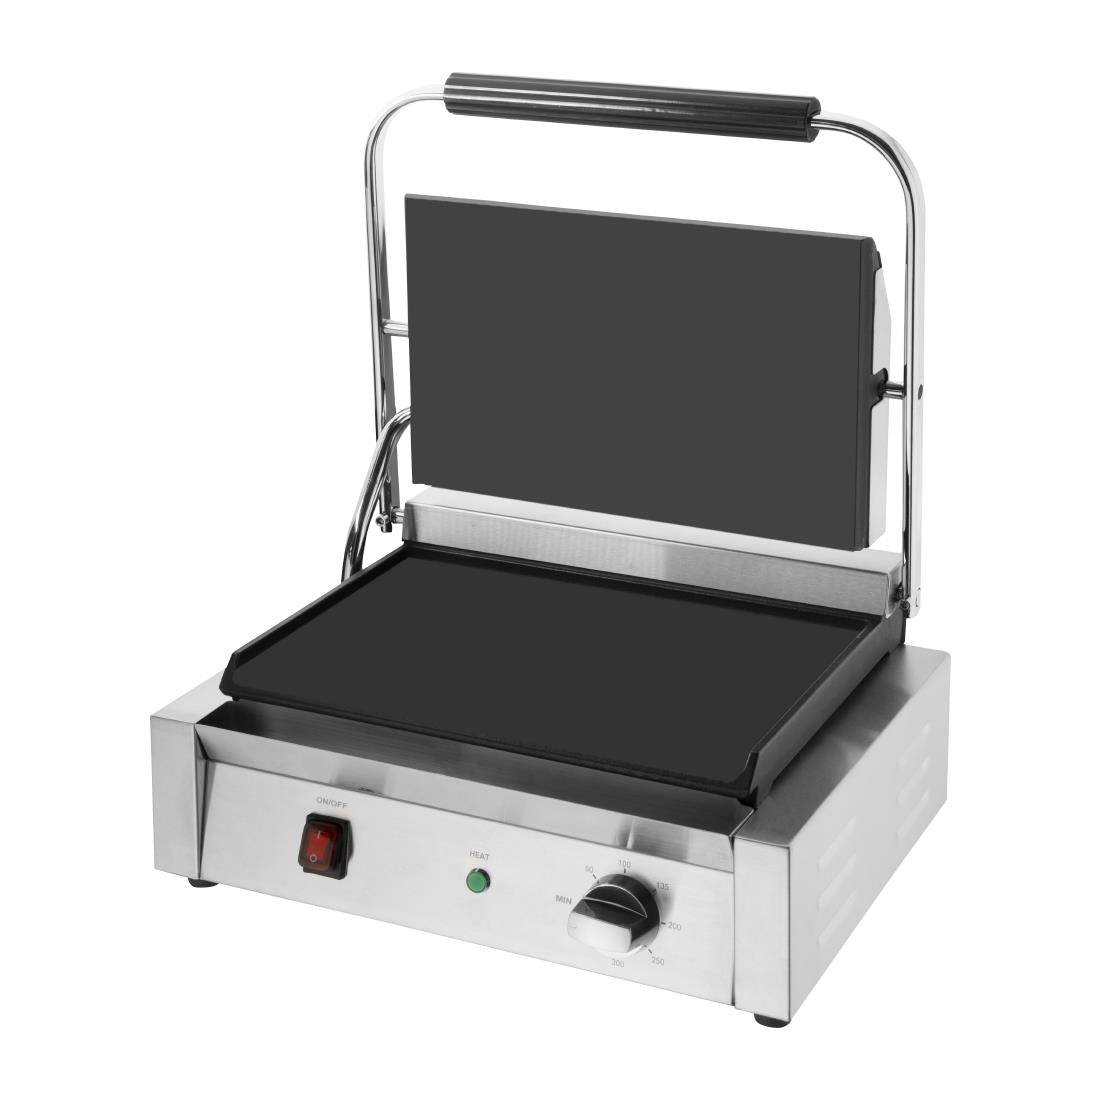 CU603 Buffalo Bistro Large Contact Grill